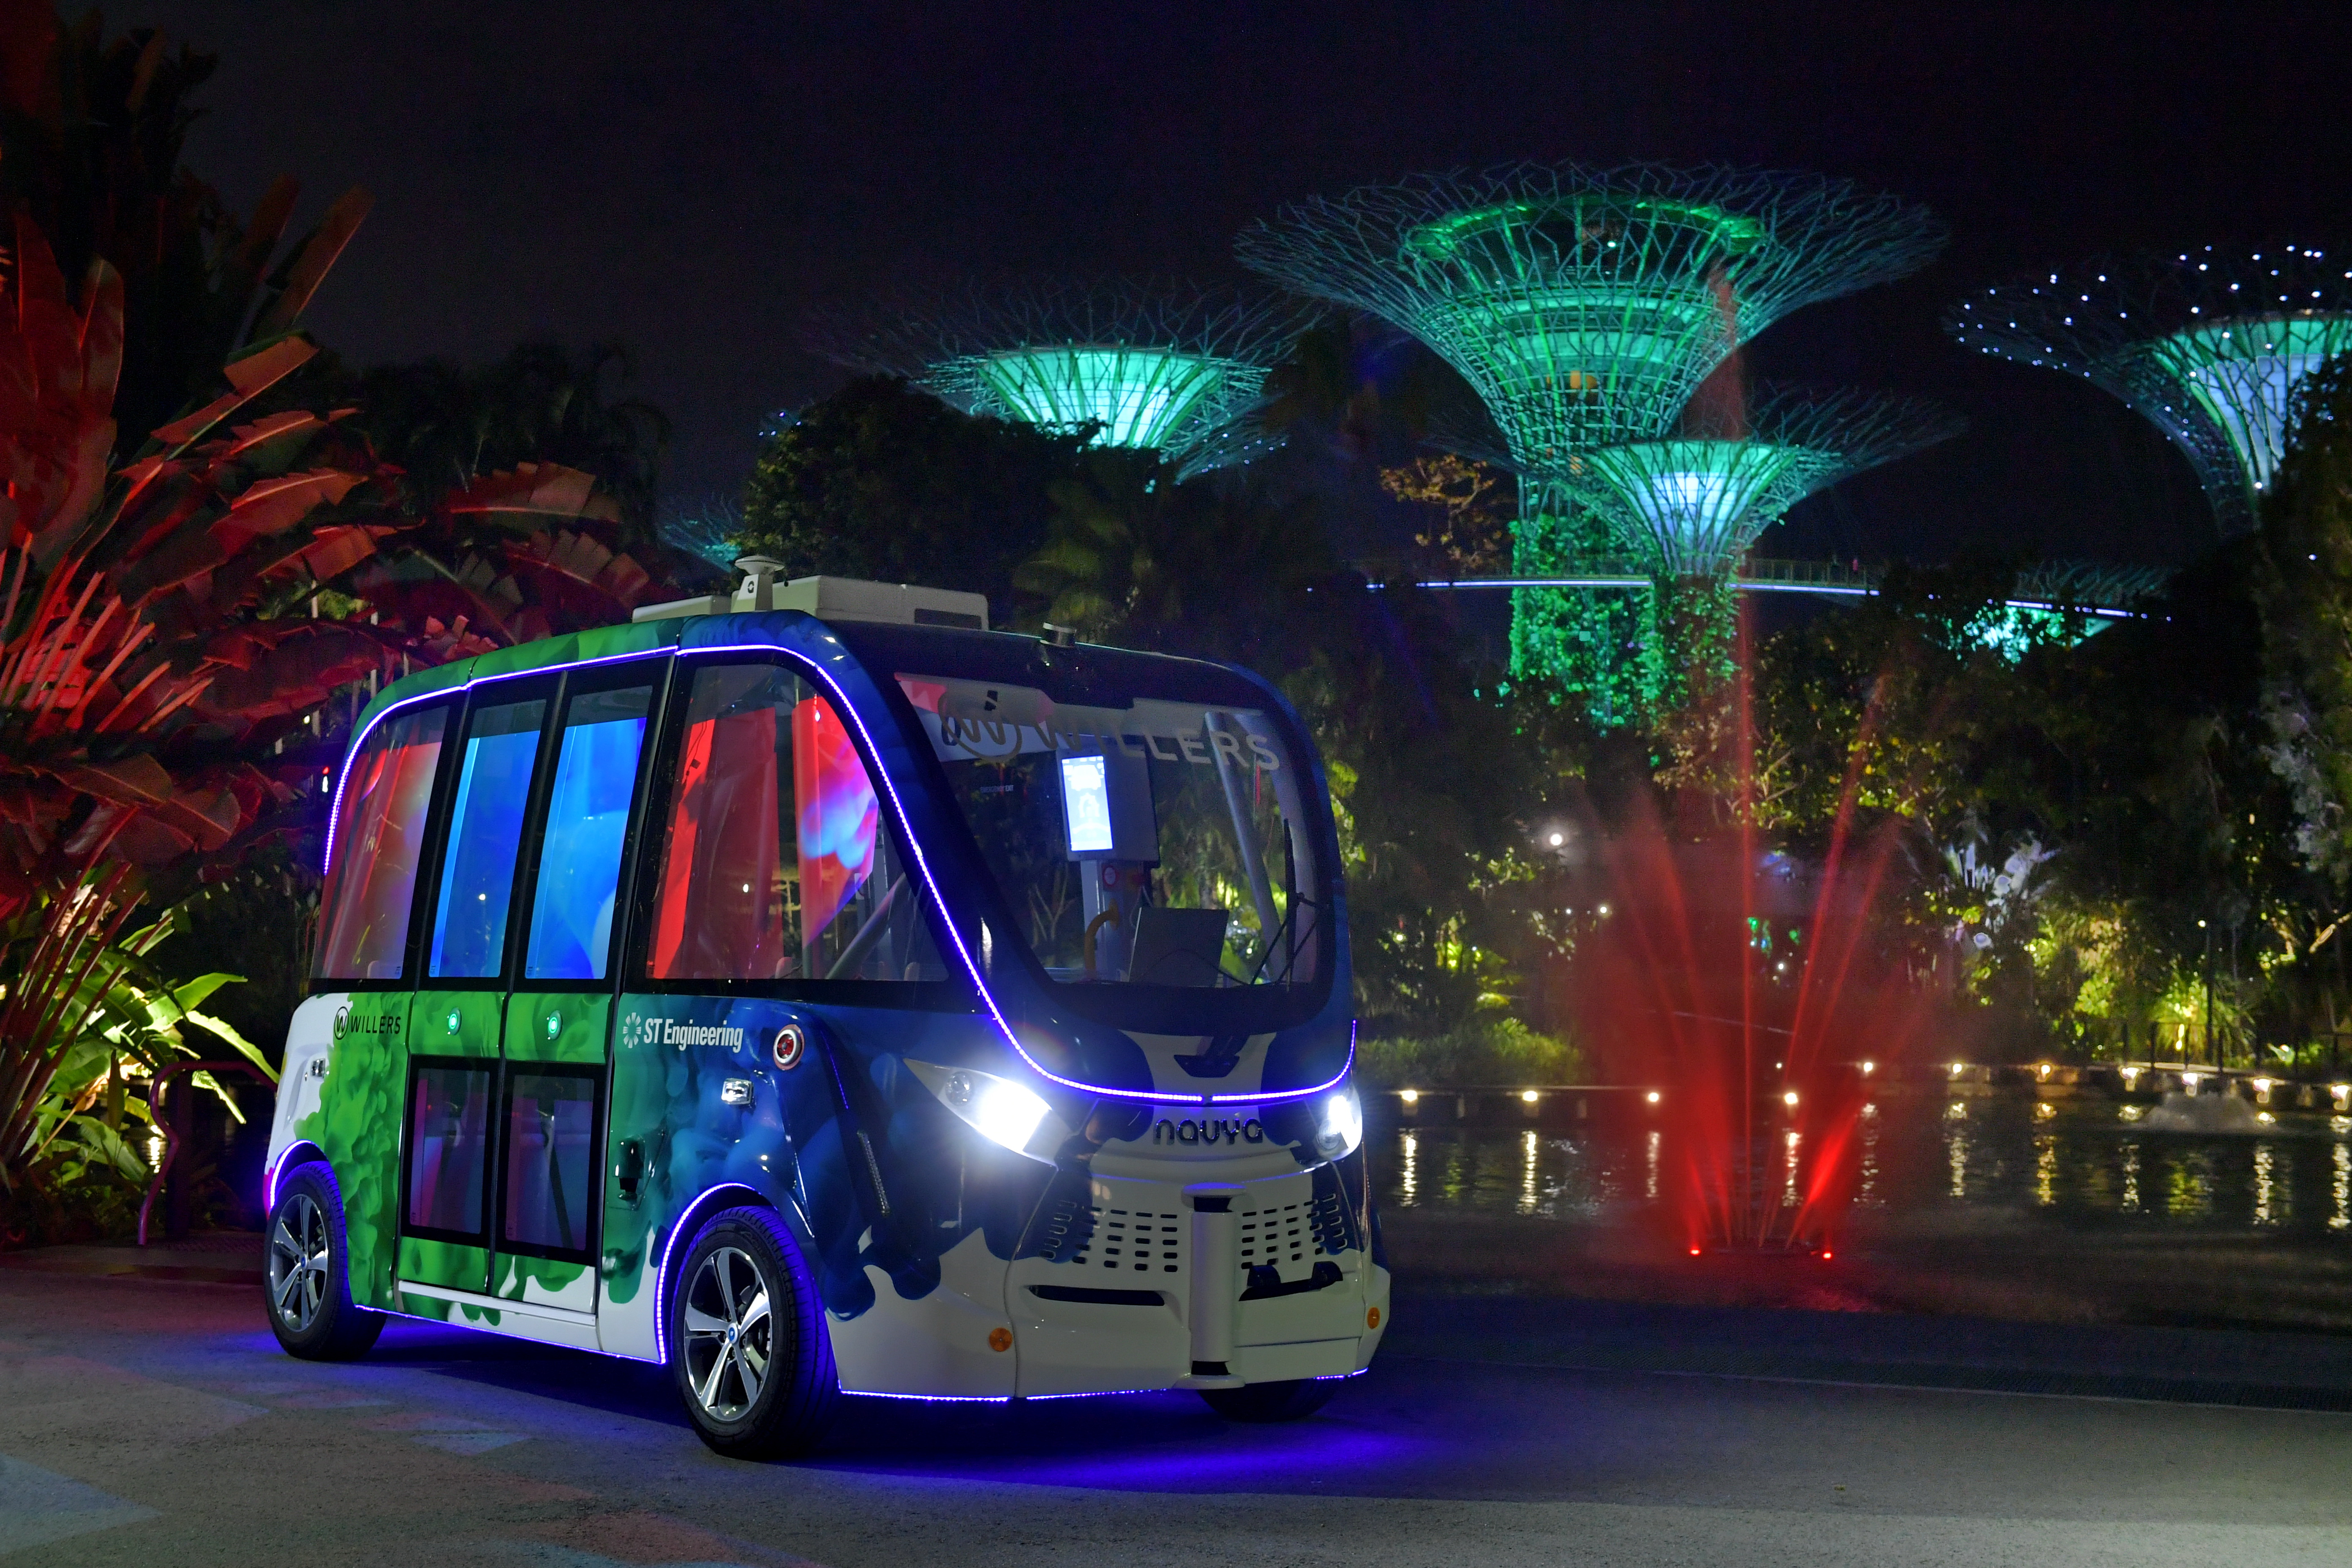 Gardens by the bay self driving vehicle